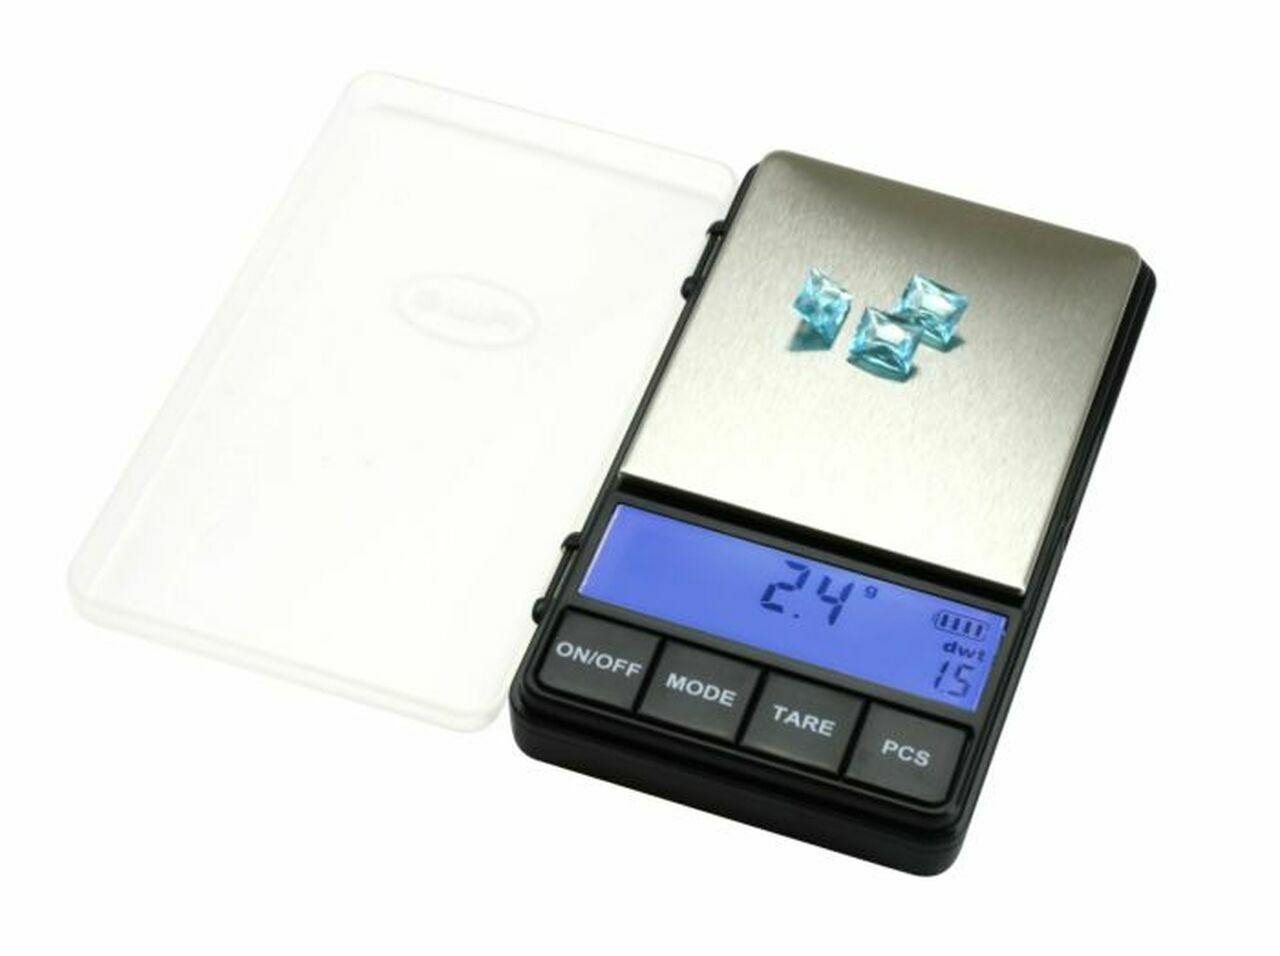 American Weigh Scales Tare and Auto-Off Kitchen Scale & Reviews